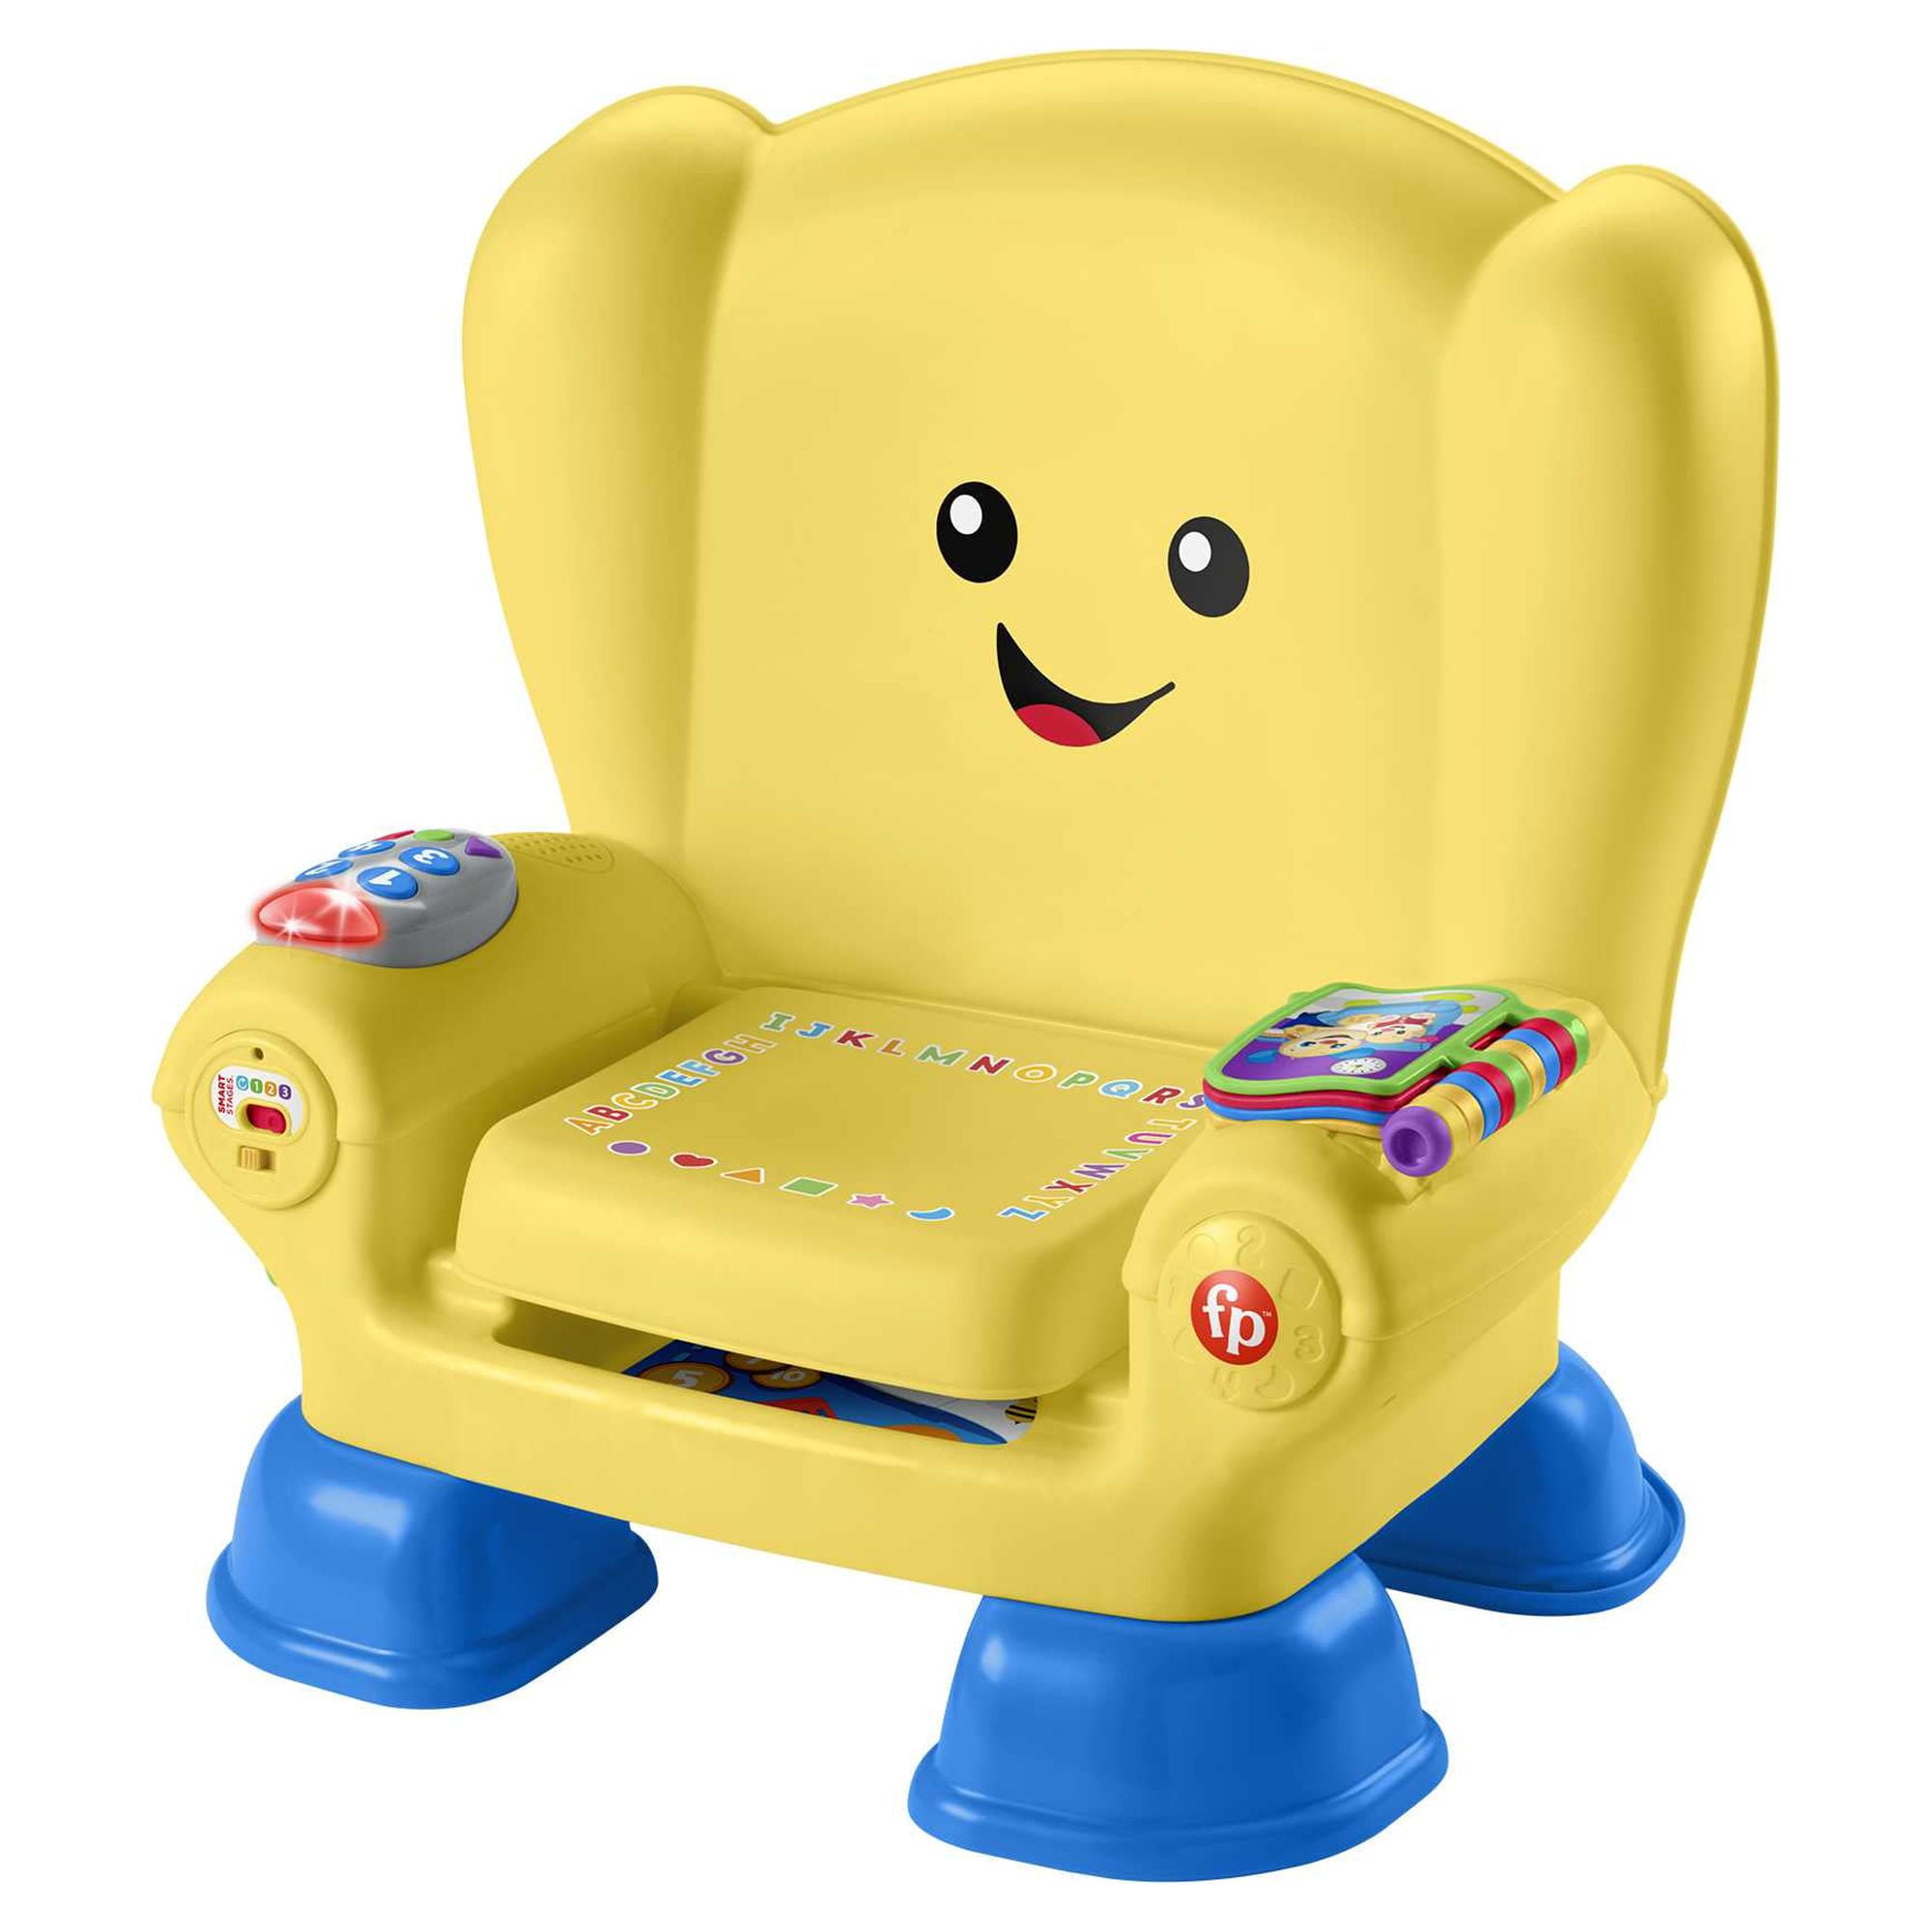 Fisher-Price Laugh & Learn Smart Stages Chair Electronic Learning